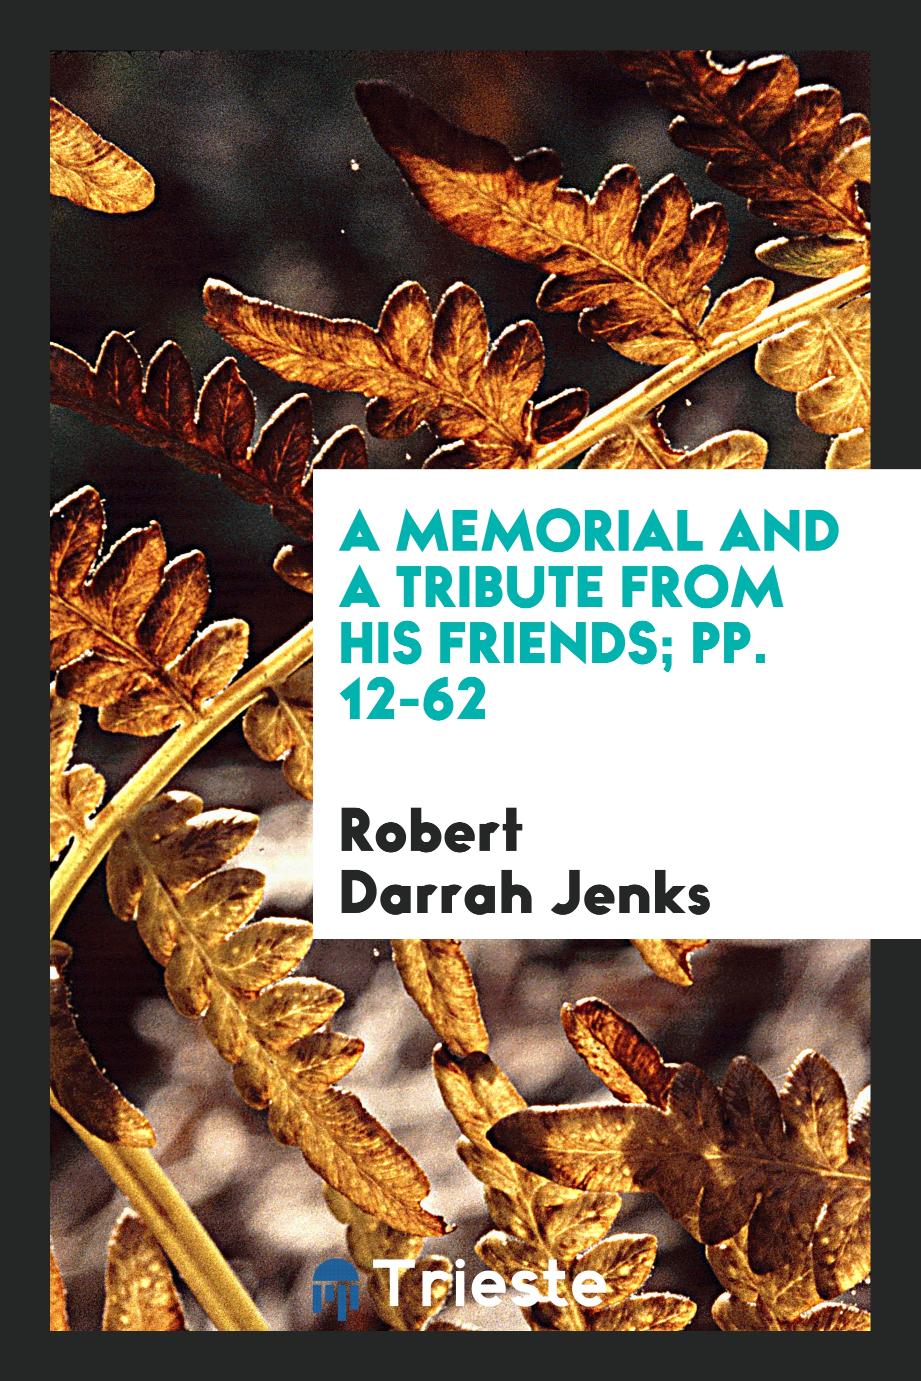 A Memorial and a Tribute from His Friends; pp. 12-62